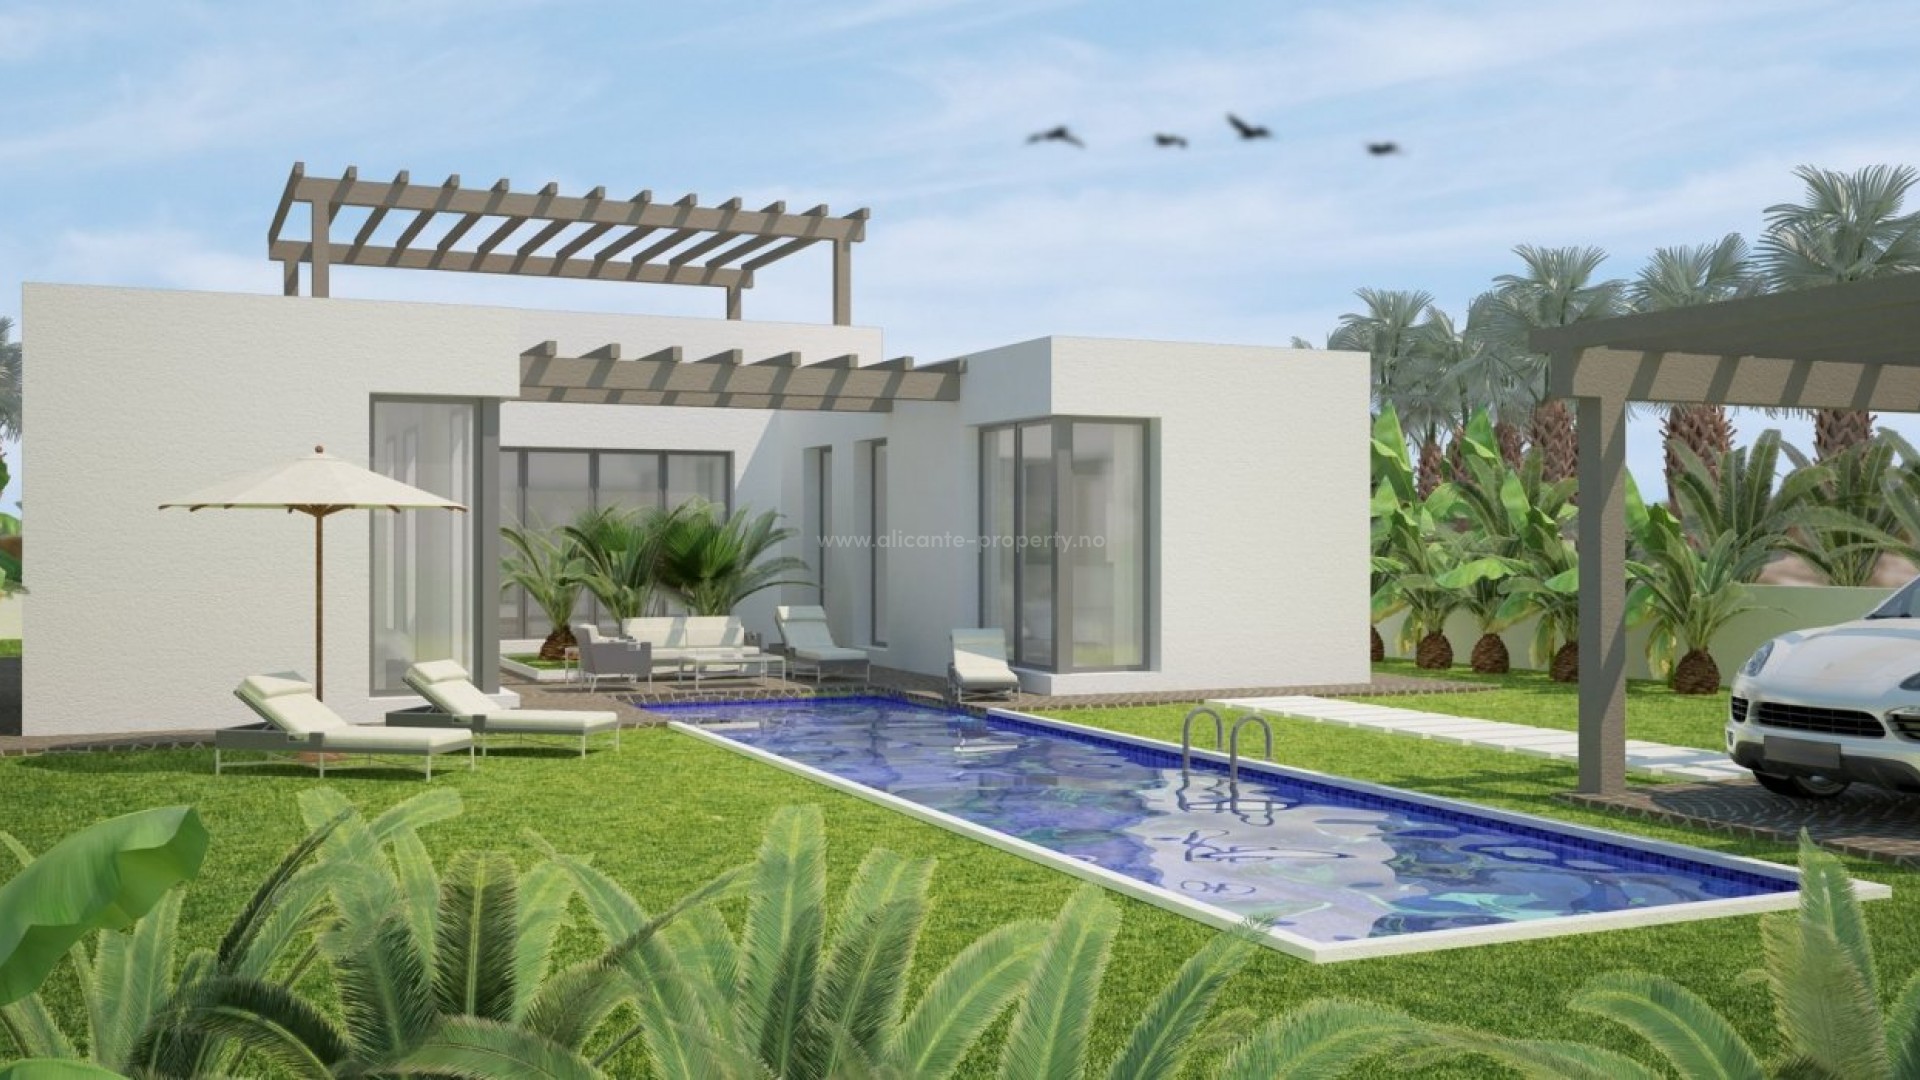 Brand new modern houses/villas in Benijofar, 3 bedrooms, 2 bathrooms, terrace, private garden with pool and great views, own parking space